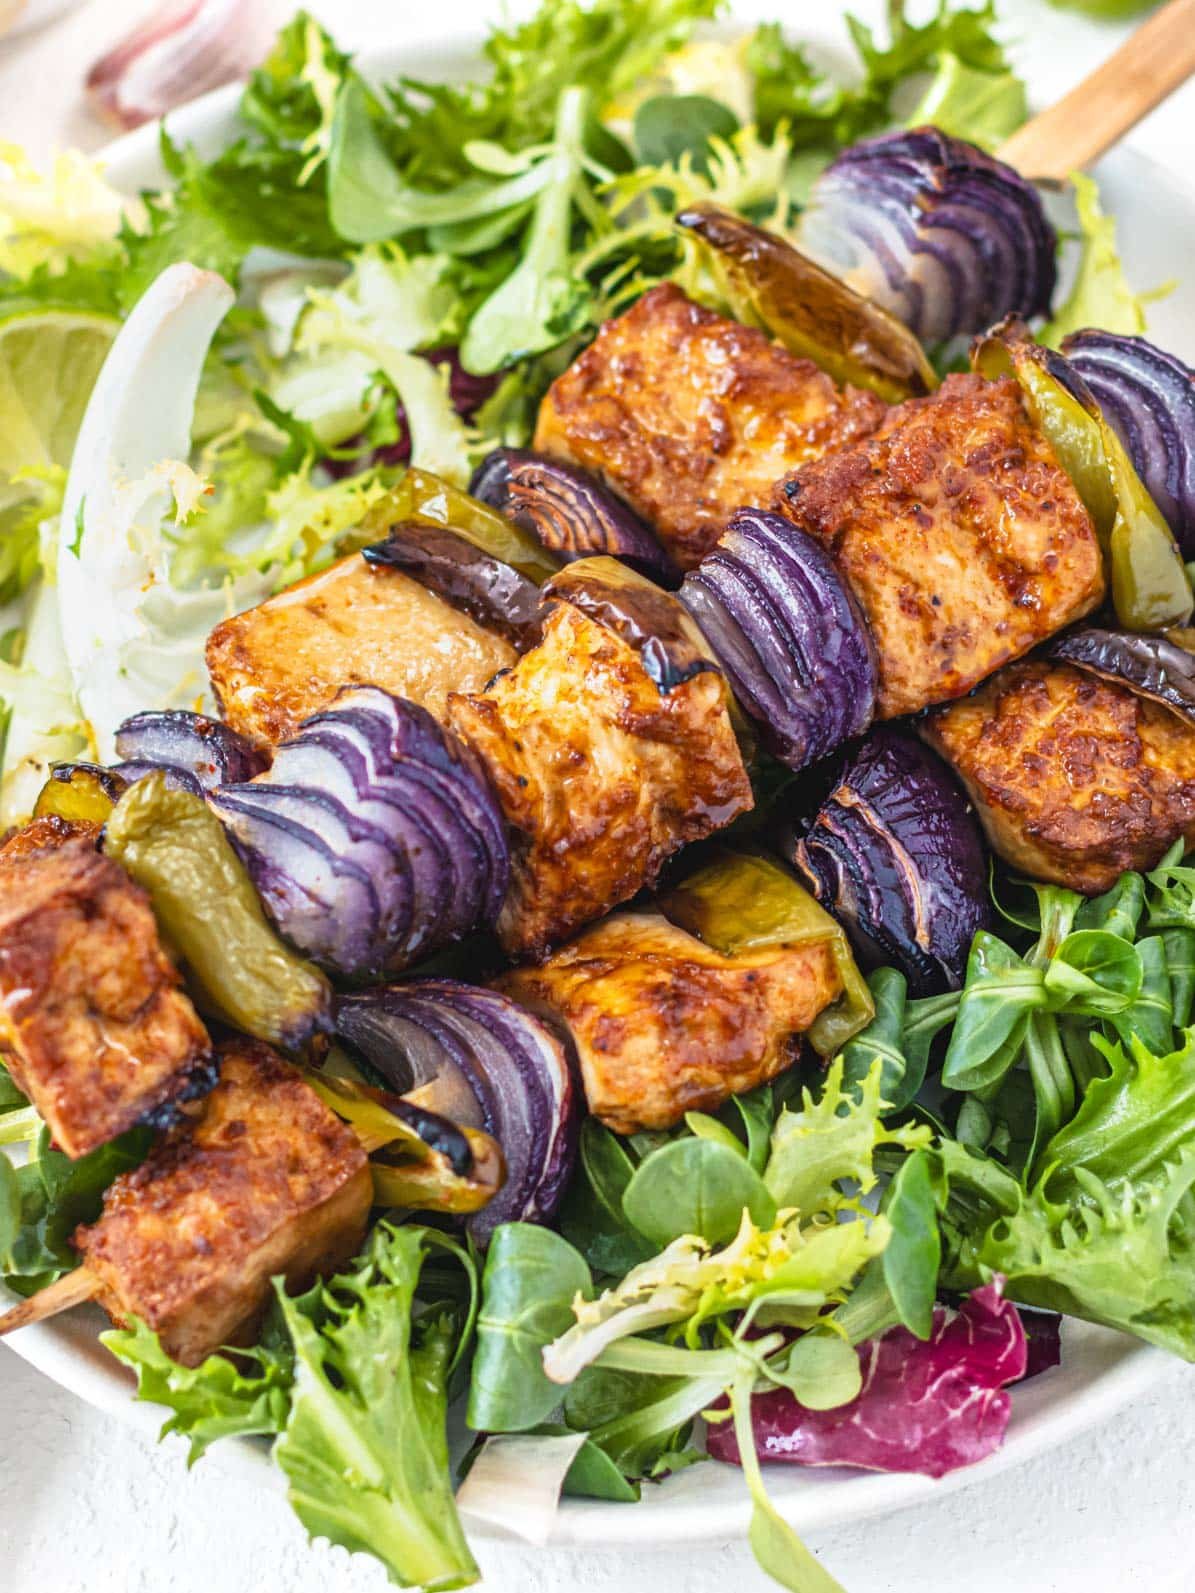 Baked tofu on skewers with onion